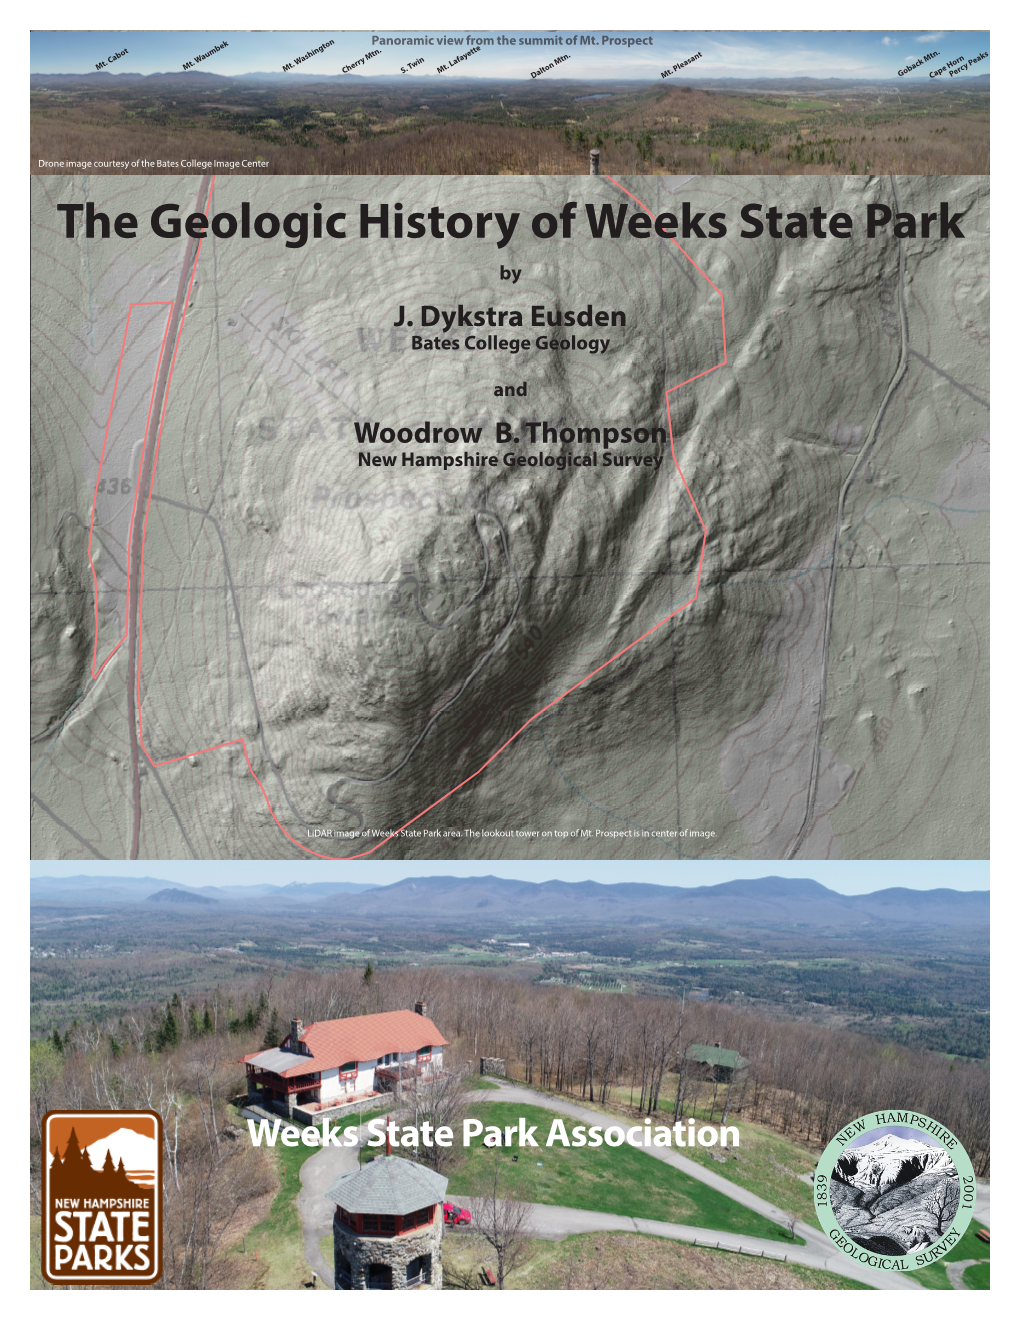 The Geologic History of Weeks State Park by J